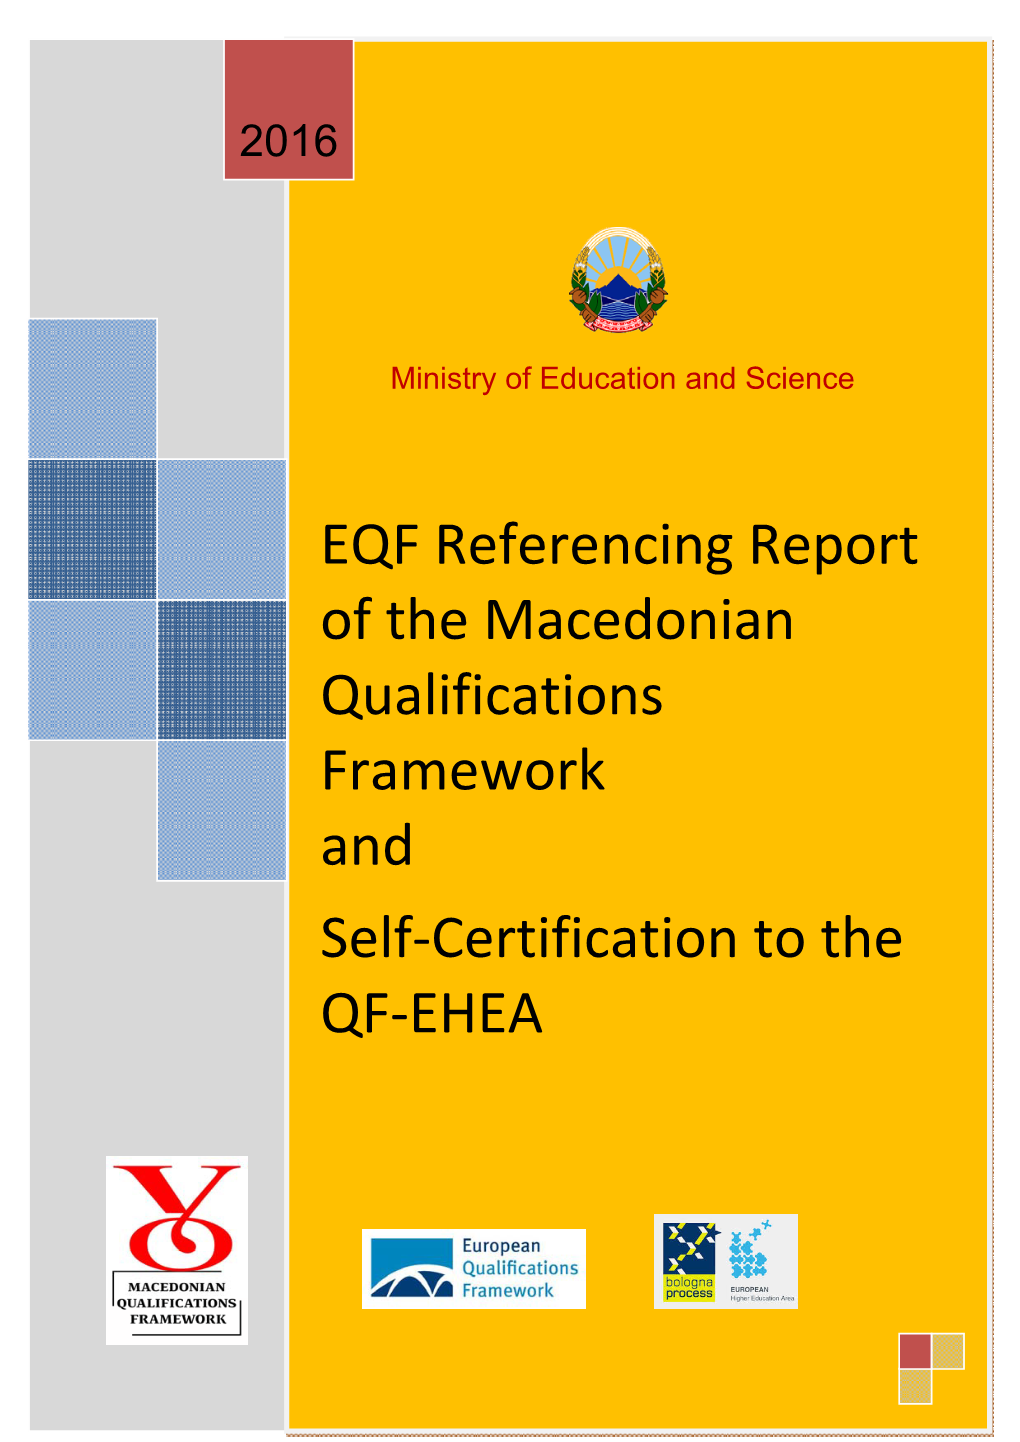 EQF Referencing Report of the Macedonian Qualifications Framework and Self-Certification to the QF-EHEA